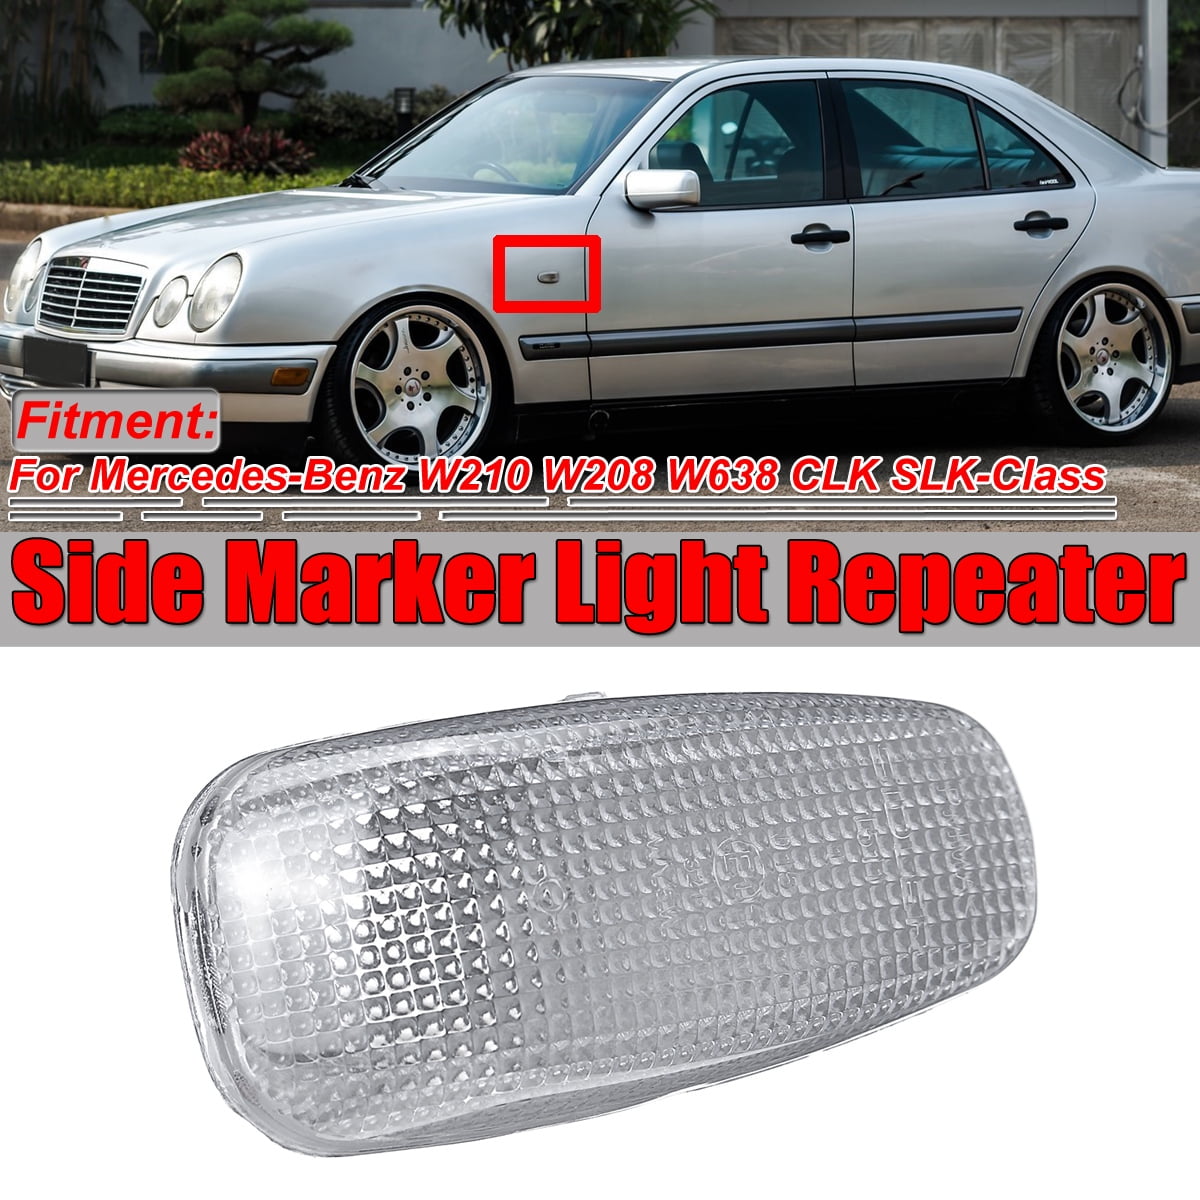 Dynamic Side Indicators Gempro Turn Signal Light Flowing Side Marker light Clear For E-Class W210 C-Class W202 CLK-Class W208 SLK-Class R170 Vito W638 